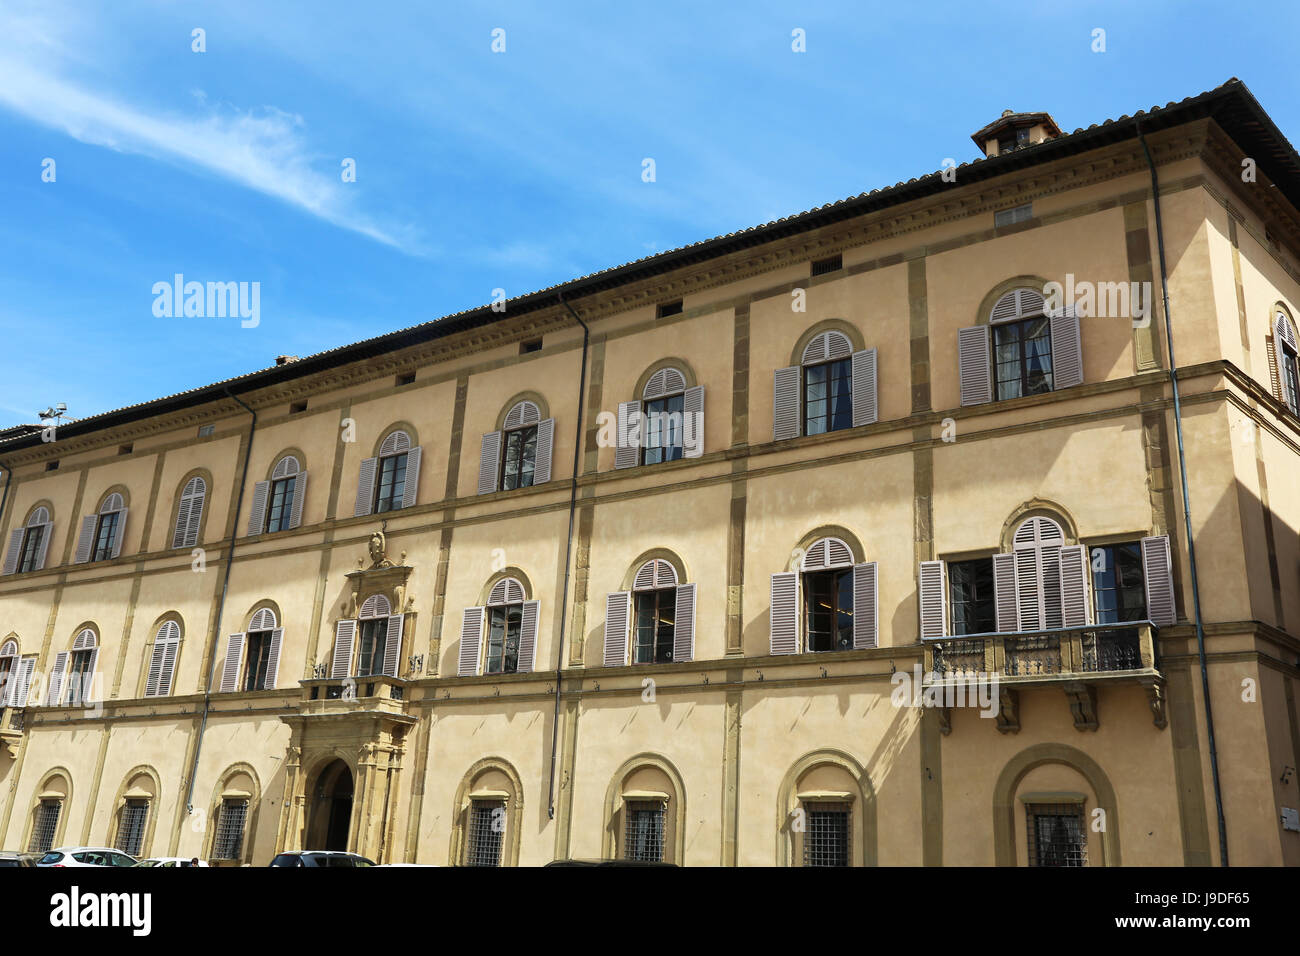 tuscany, museum, sienna, italy, square, palace, piazza, amministrazione, Stock Photo